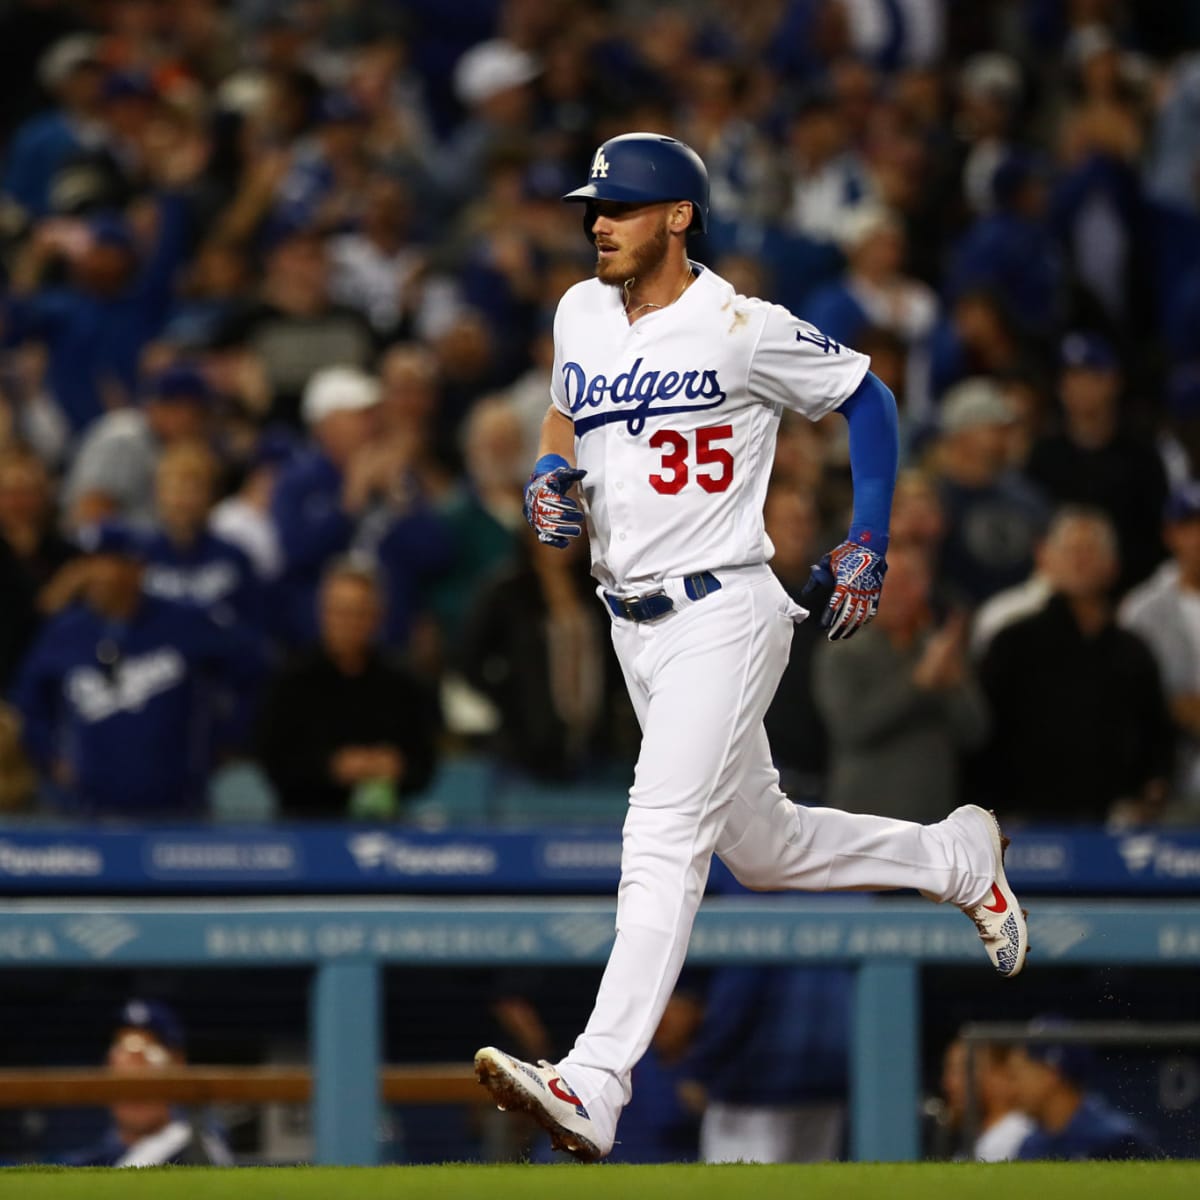 Cody Bellinger of the Los Angeles Dodgers stands on the field during